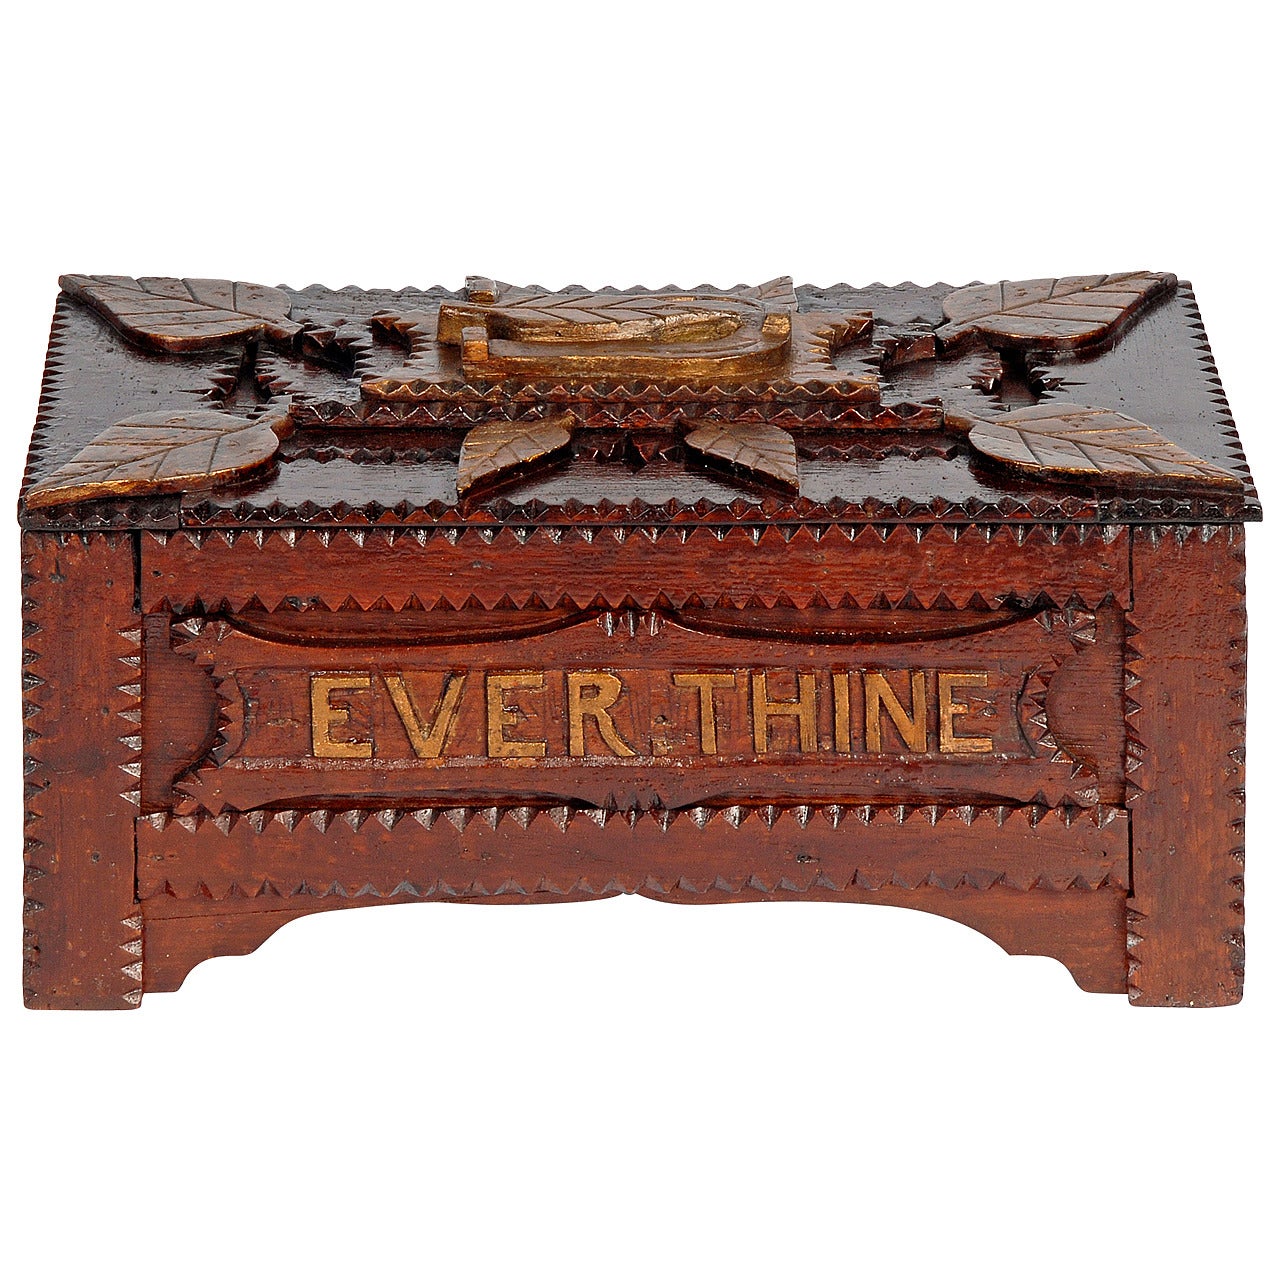 'Ever Thine' Inscribed Tramp Art Box with Leaves, Hearts and a Horeshoe